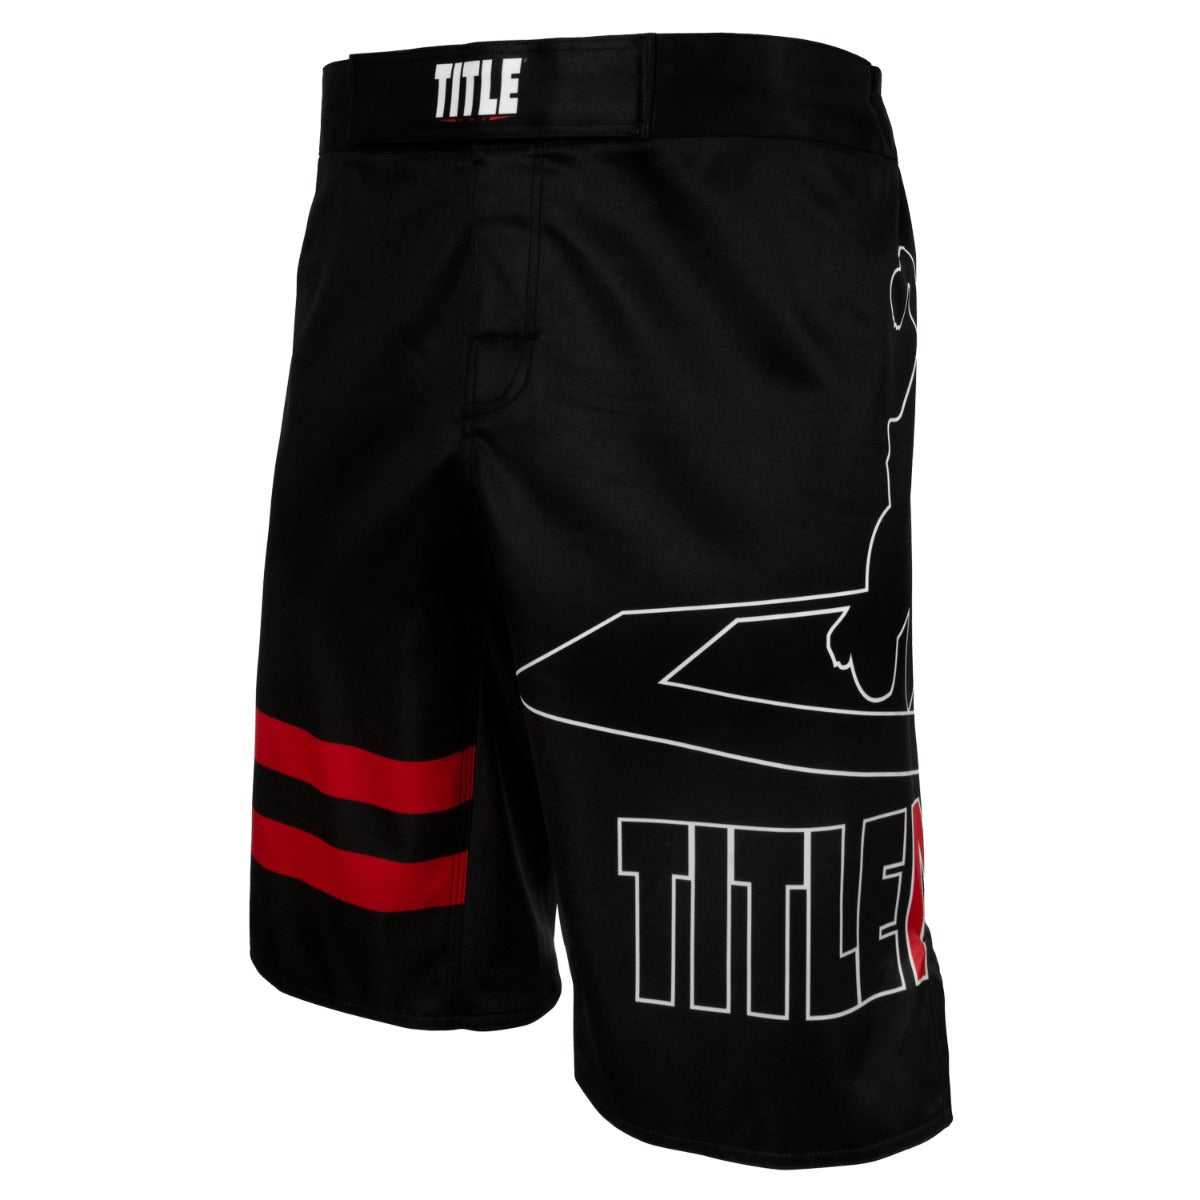 TITLE MMA Fight Shorts